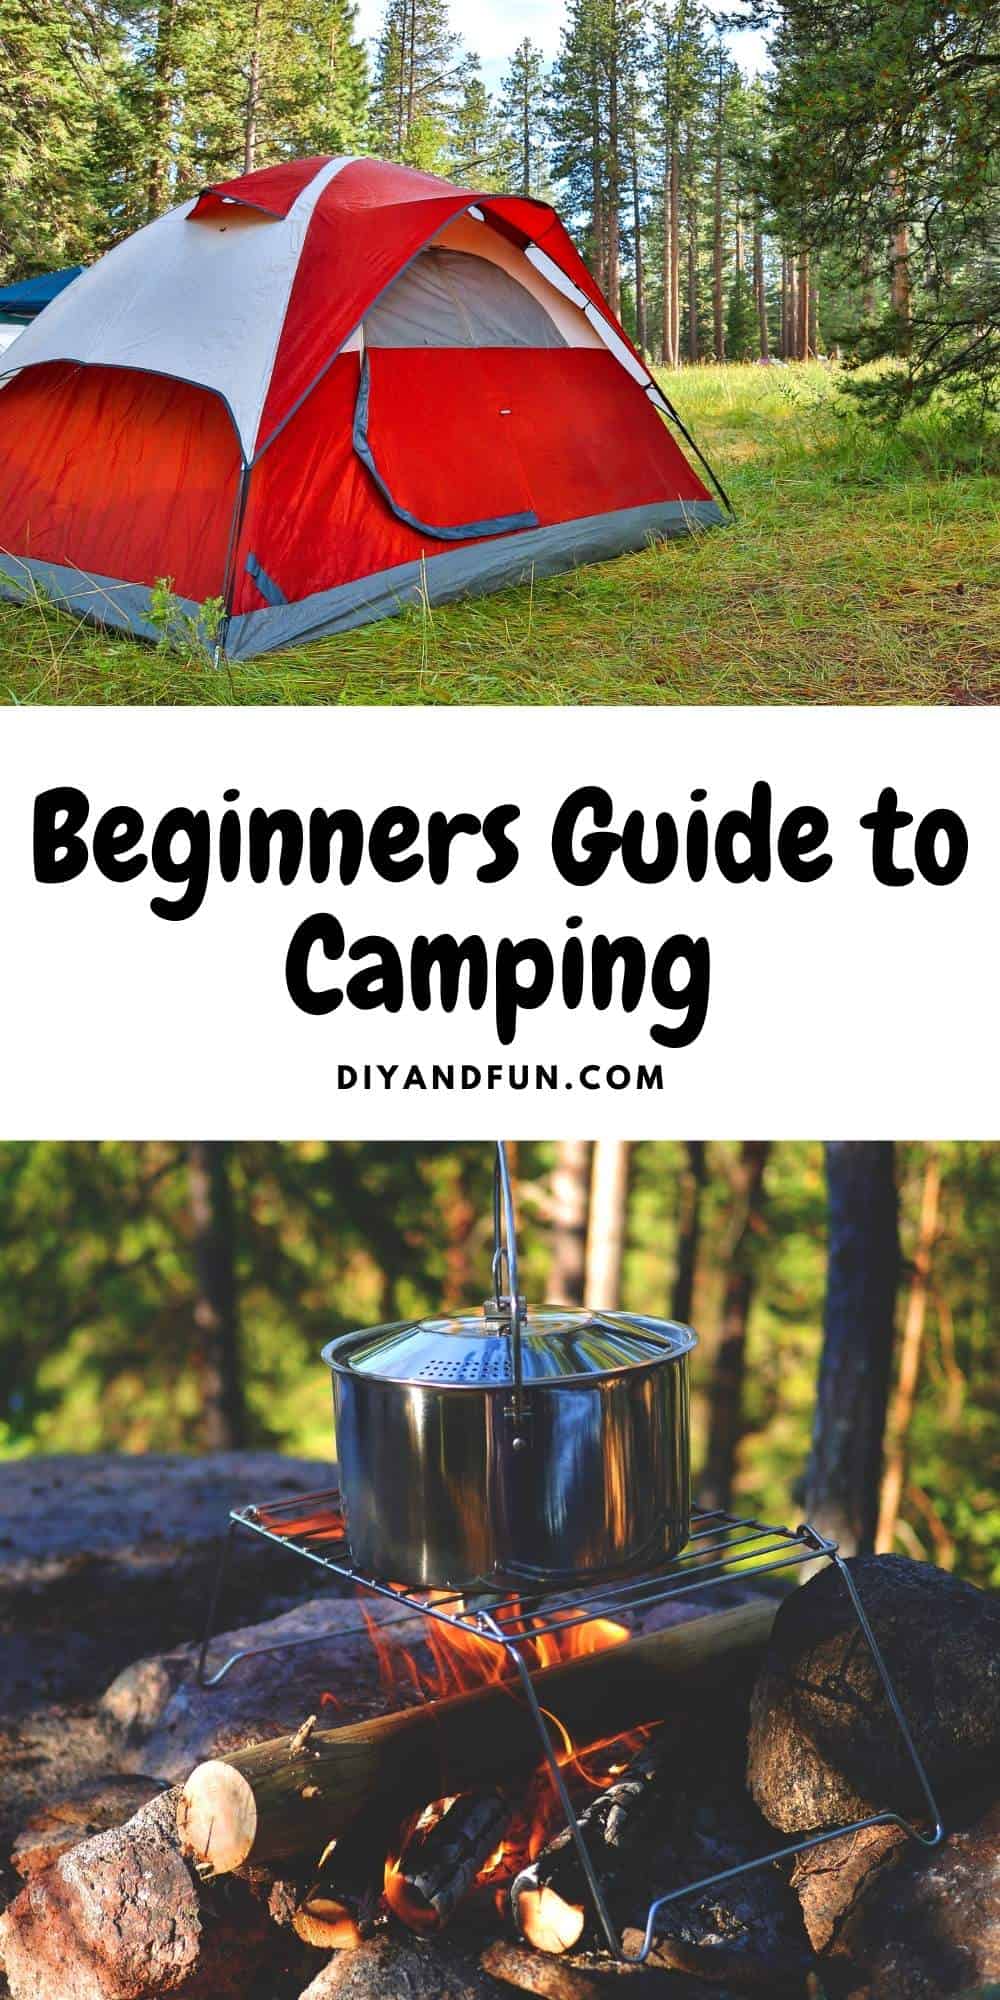 Beginners Guide to Camping, a simple guide for planning a camping trip, what to bring with you, and how to have fun.